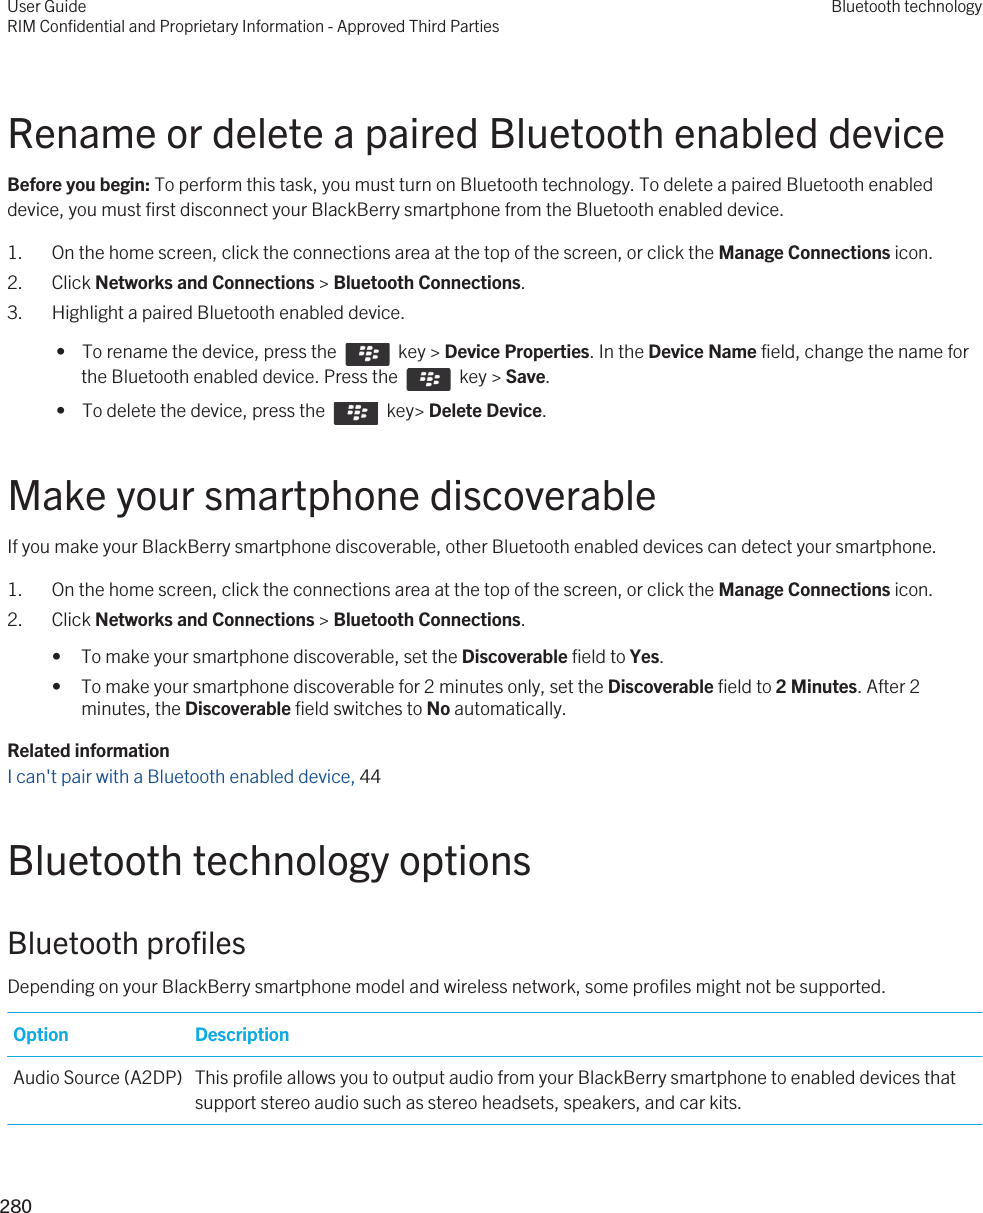 Rename or delete a paired Bluetooth enabled deviceBefore you begin: To perform this task, you must turn on Bluetooth technology. To delete a paired Bluetooth enabled device, you must first disconnect your BlackBerry smartphone from the Bluetooth enabled device.1. On the home screen, click the connections area at the top of the screen, or click the Manage Connections icon.2. Click Networks and Connections &gt; Bluetooth Connections.3. Highlight a paired Bluetooth enabled device. •  To rename the device, press the    key &gt; Device Properties. In the Device Name field, change the name for the Bluetooth enabled device. Press the    key &gt; Save. •  To delete the device, press the    key&gt; Delete Device.Make your smartphone discoverableIf you make your BlackBerry smartphone discoverable, other Bluetooth enabled devices can detect your smartphone.1. On the home screen, click the connections area at the top of the screen, or click the Manage Connections icon.2. Click Networks and Connections &gt; Bluetooth Connections.• To make your smartphone discoverable, set the Discoverable field to Yes.• To make your smartphone discoverable for 2 minutes only, set the Discoverable field to 2 Minutes. After 2 minutes, the Discoverable field switches to No automatically.Related informationI can&apos;t pair with a Bluetooth enabled device, 44 Bluetooth technology optionsBluetooth profilesDepending on your BlackBerry smartphone model and wireless network, some profiles might not be supported.Option DescriptionAudio Source (A2DP) This profile allows you to output audio from your BlackBerry smartphone to enabled devices that support stereo audio such as stereo headsets, speakers, and car kits.User GuideRIM Confidential and Proprietary Information - Approved Third PartiesBluetooth technology280 